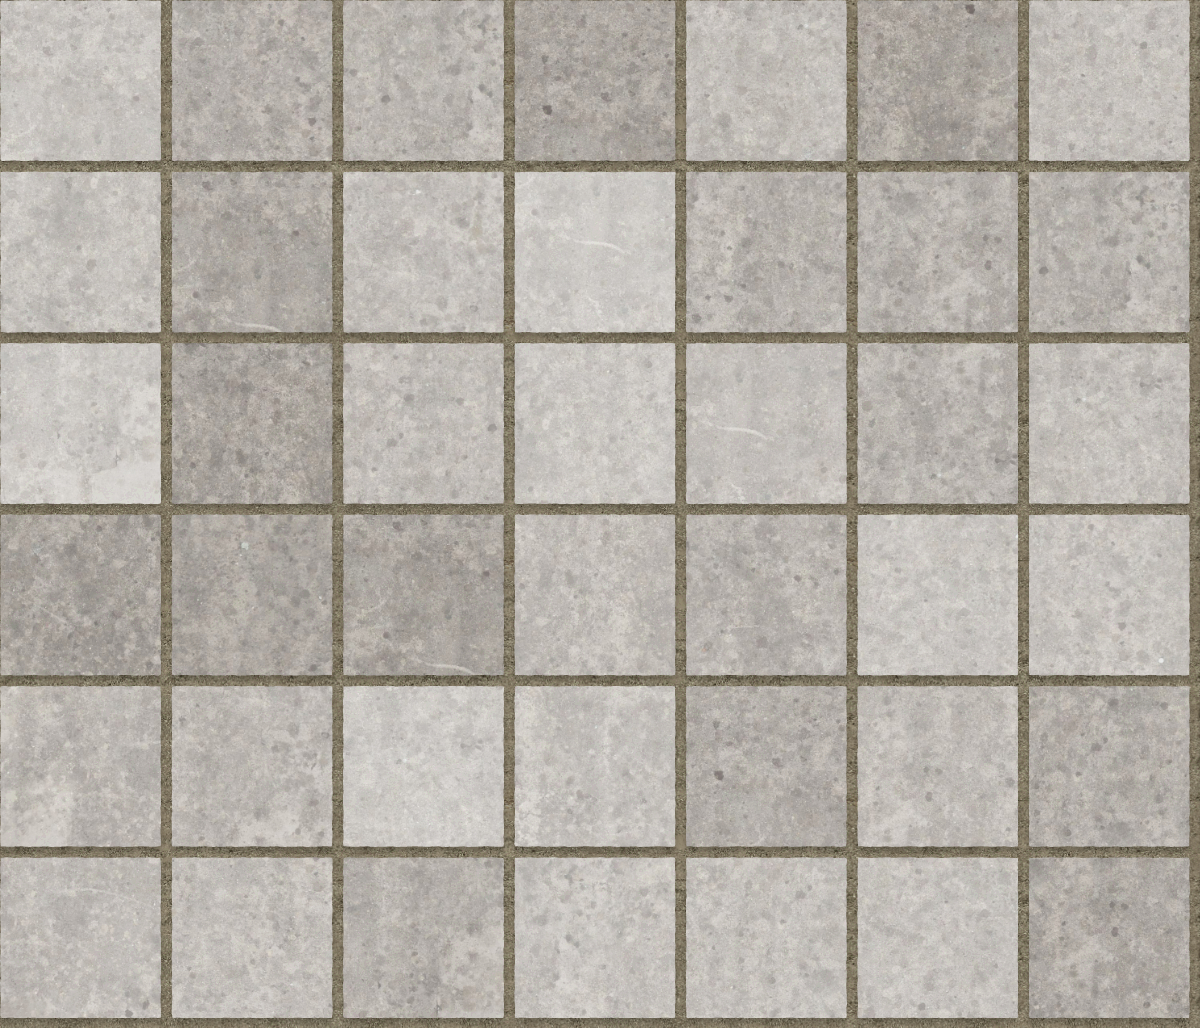 A seamless concrete texture with concrete blocks arranged in a Stack pattern